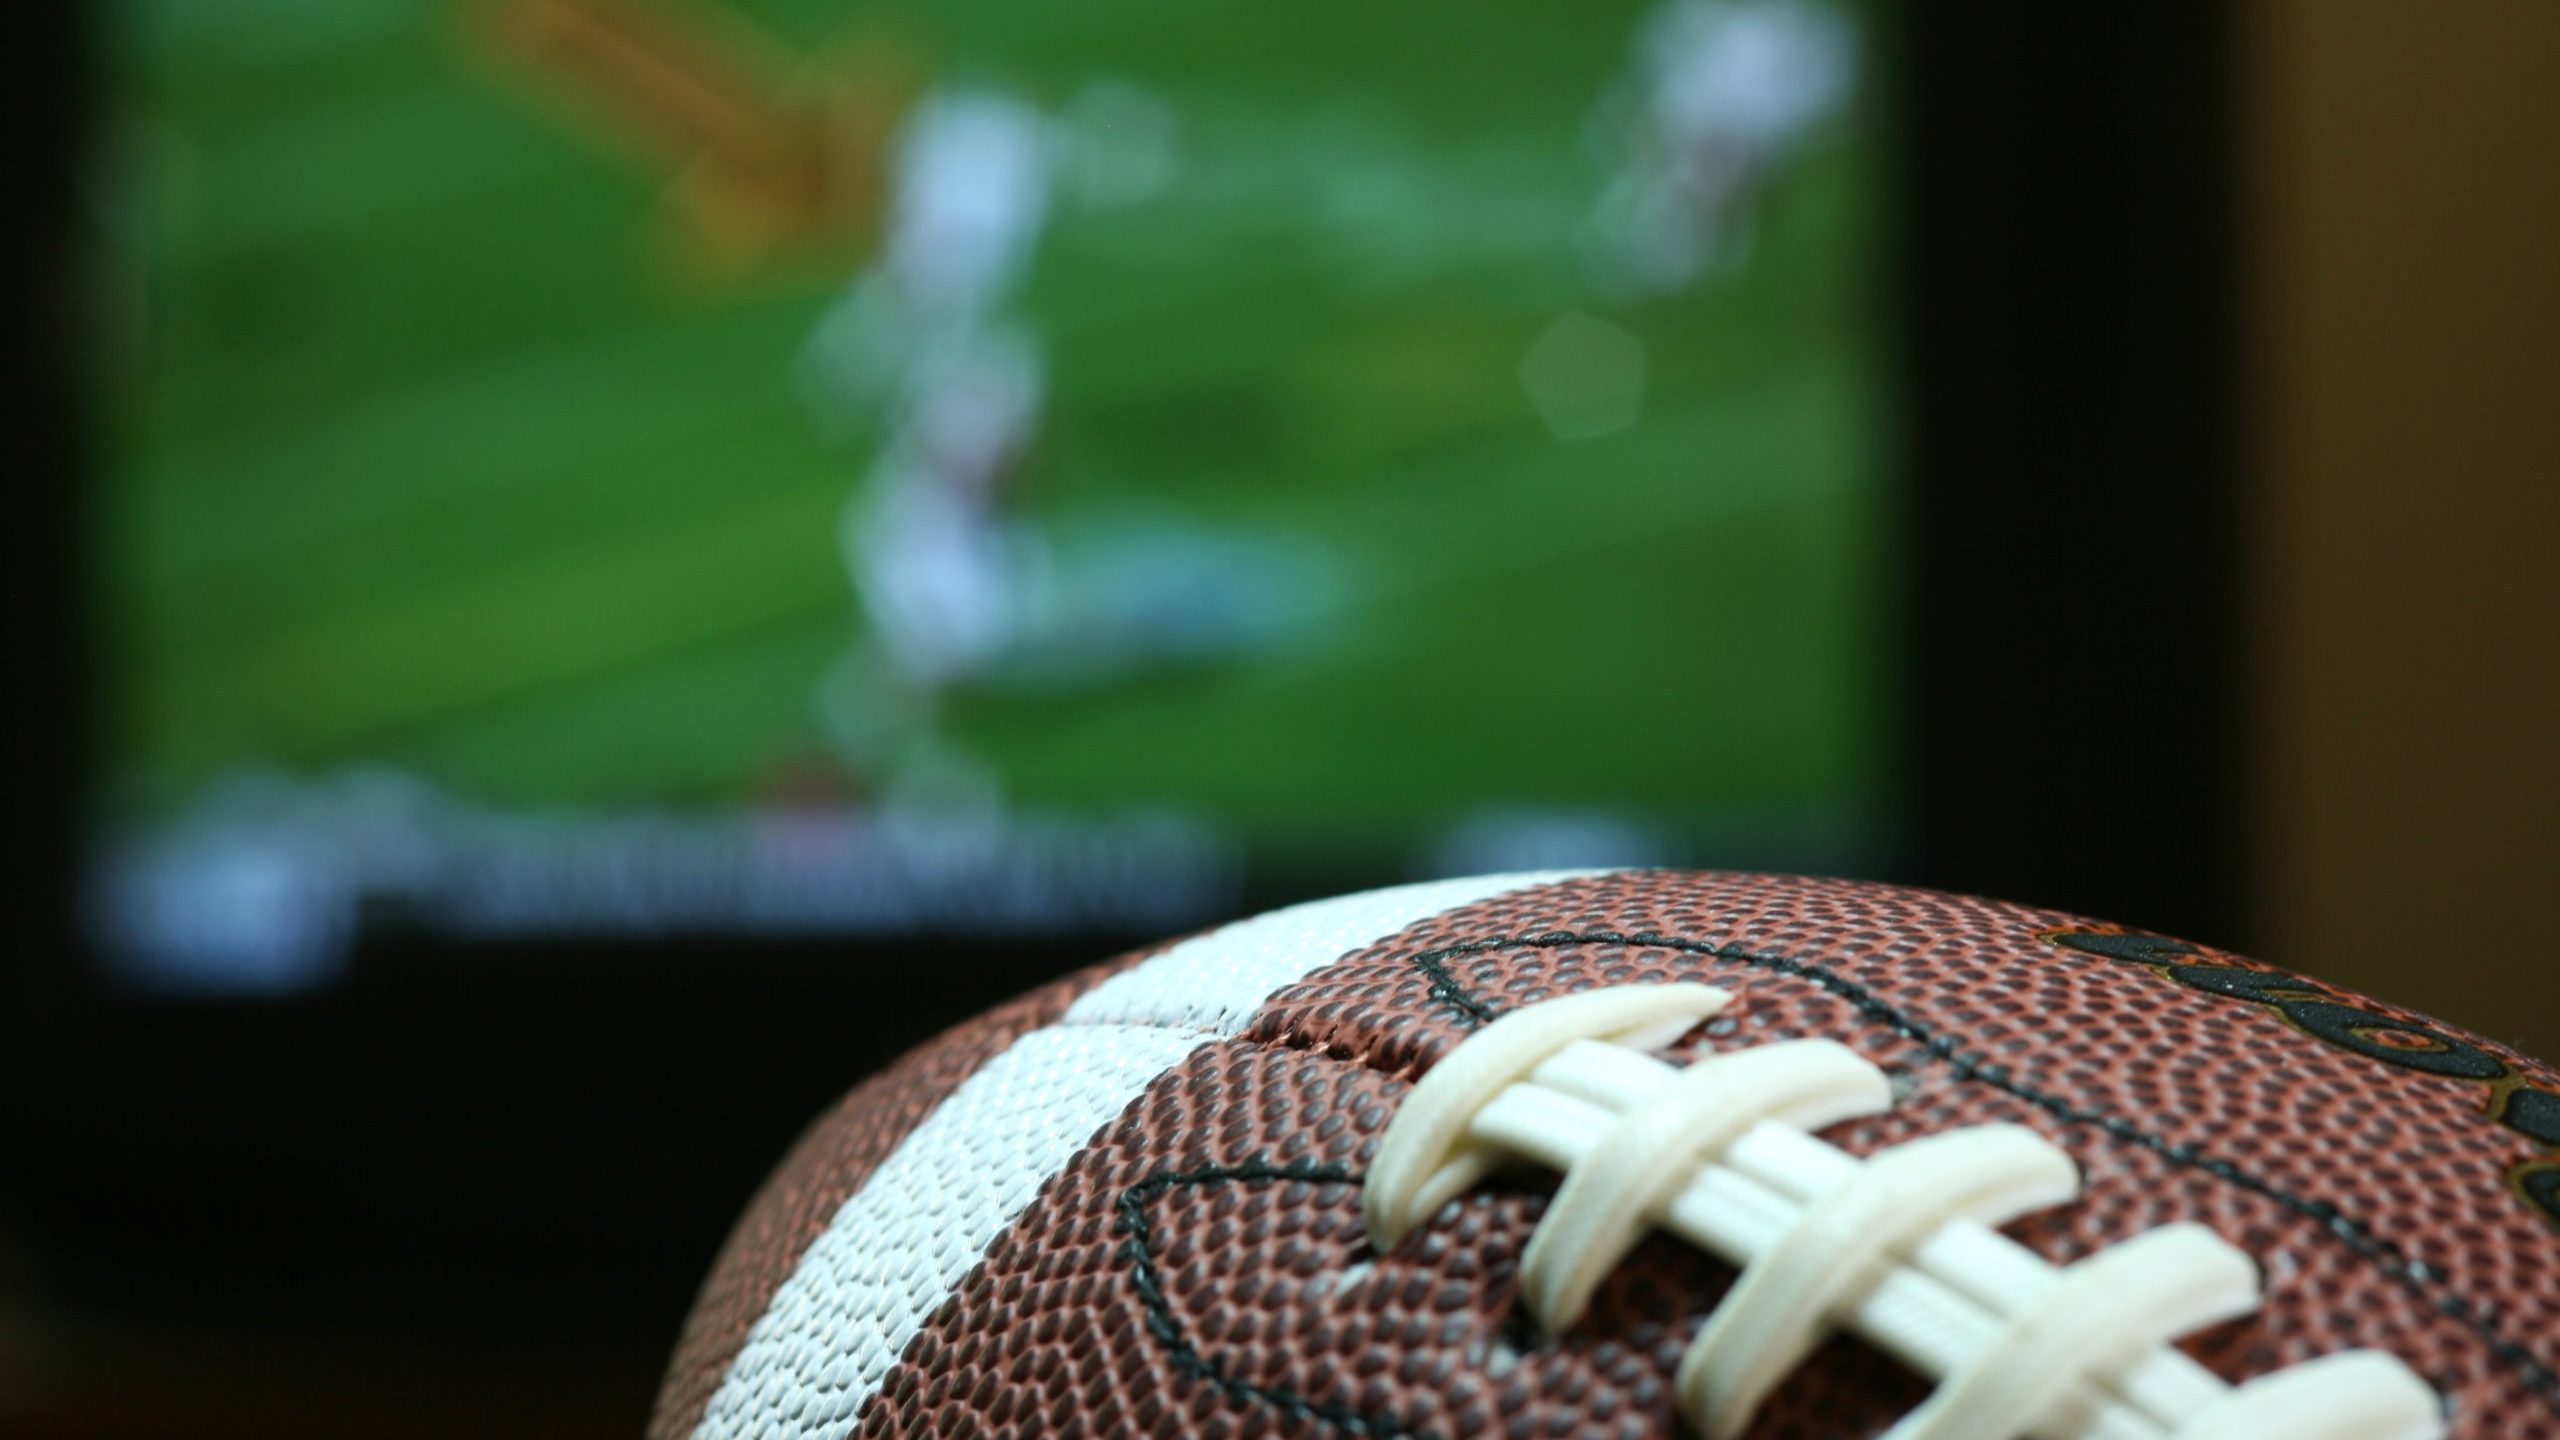 Football in front of TV screen playing game